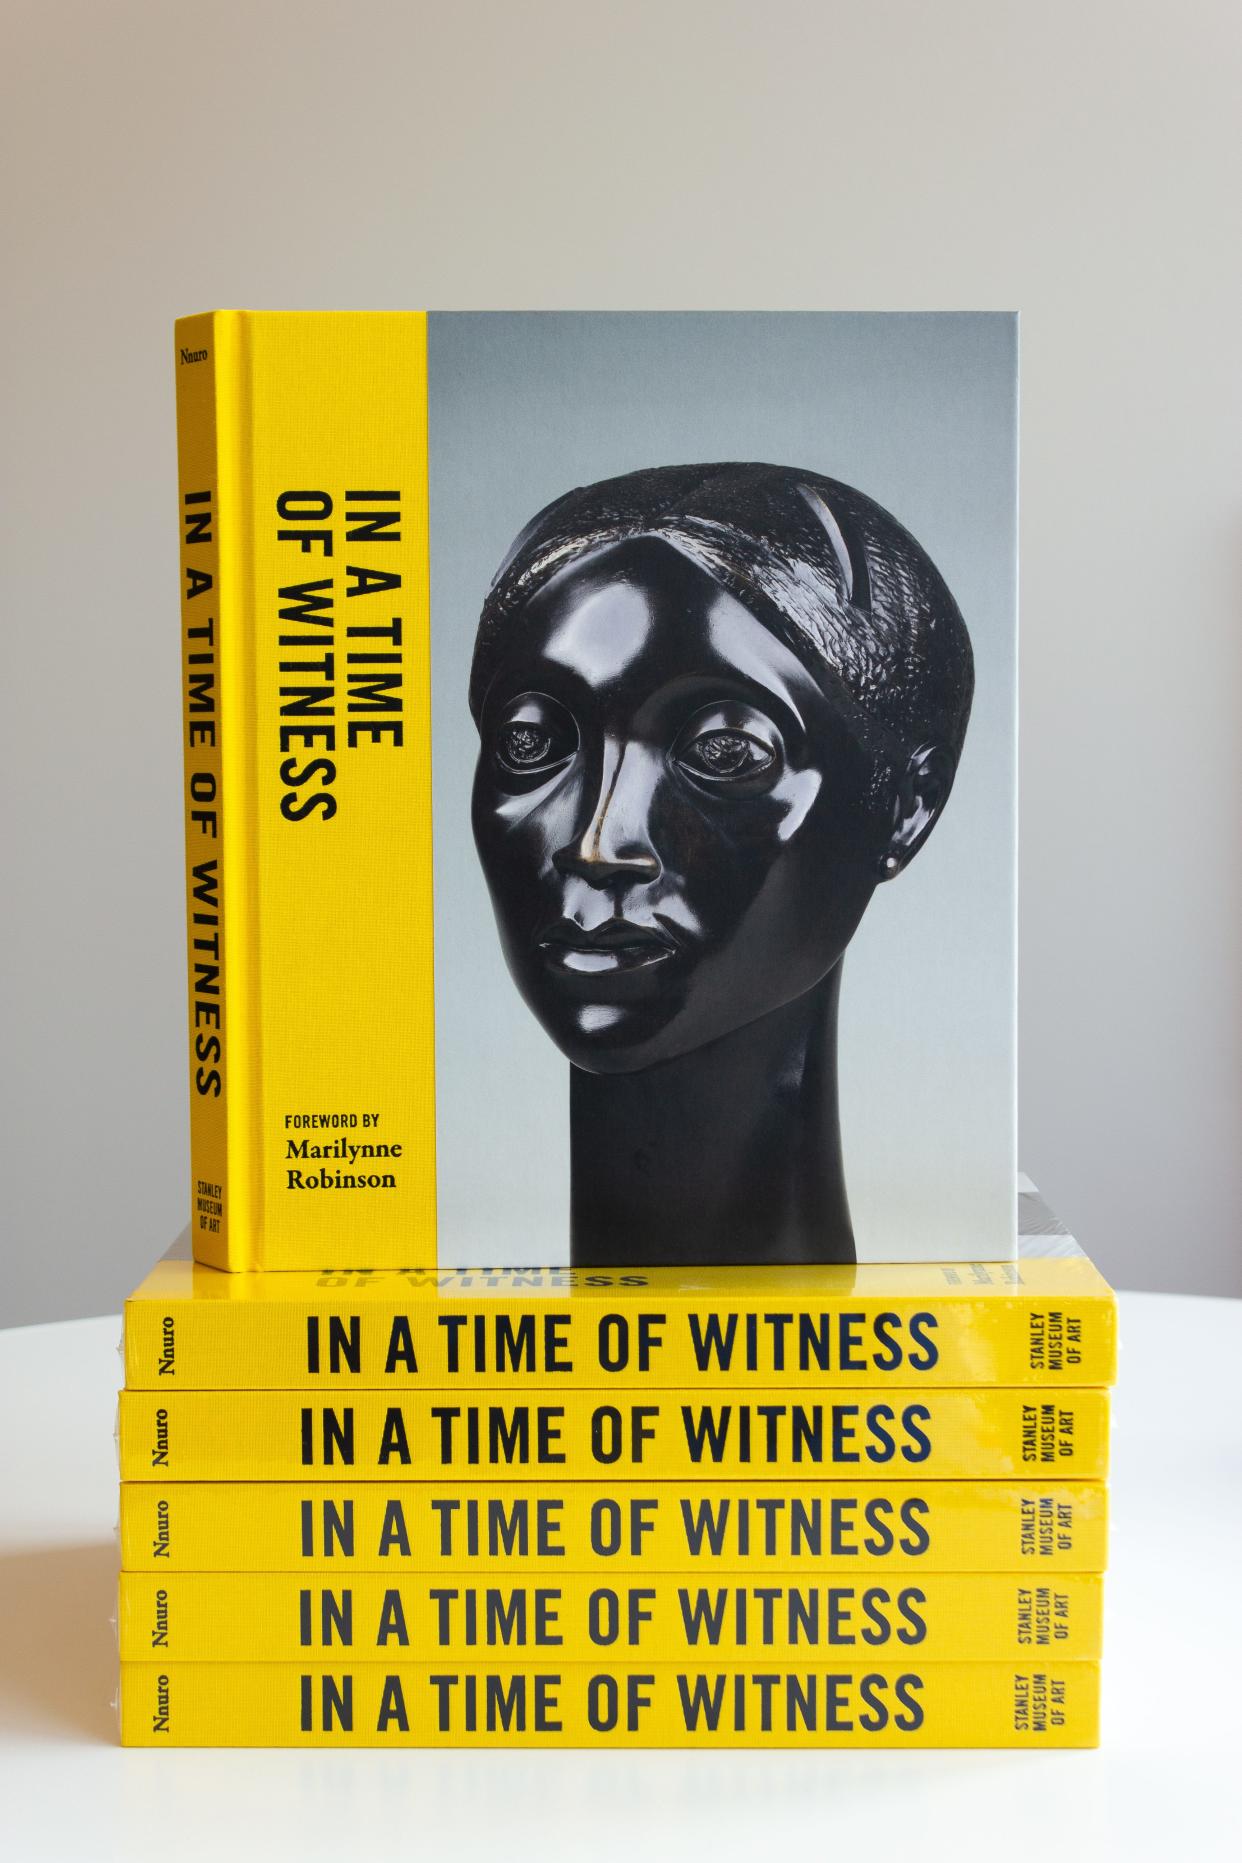 Published by the Stanley Museum of Art and distributed by University of Iowa Press, "In a Time of Witness" highlights the museum's celebrated collection with original literary interpretations.